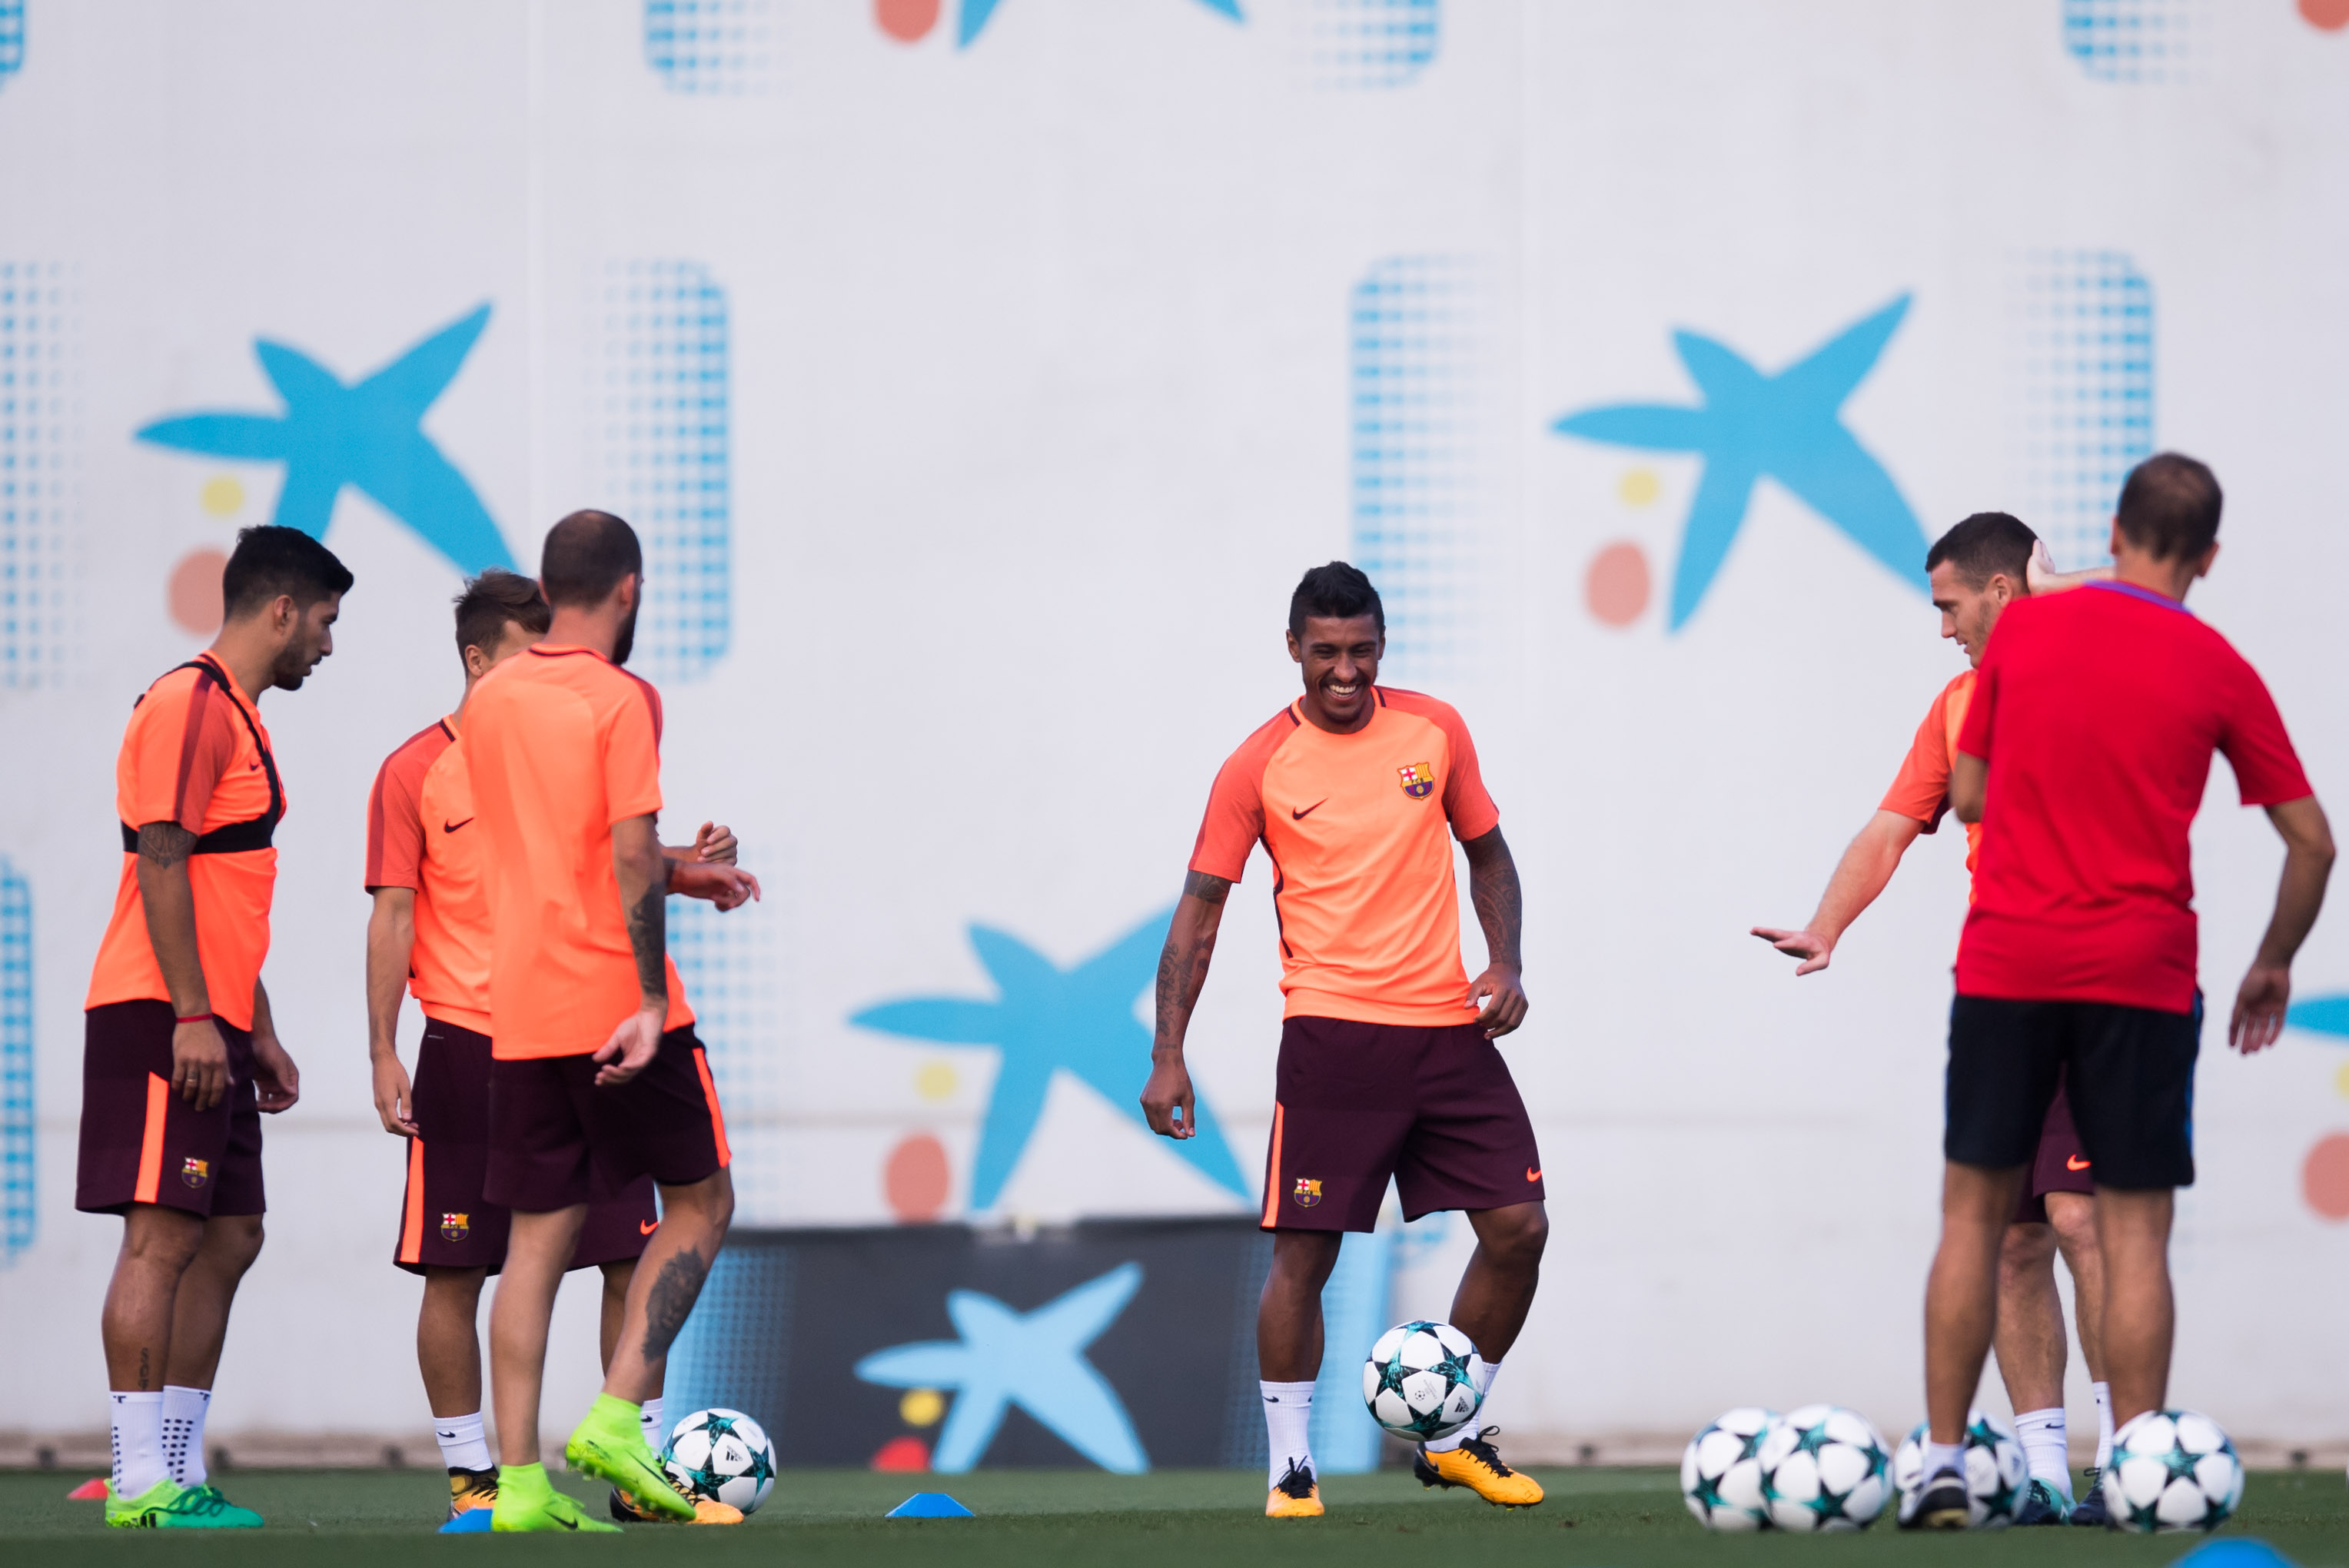 BARCELONA, SPAIN - SEPTEMBER 11: Paulinho of FC Barcelona controls the ball during a training session ahead of the UEFA Champions League Group D match against Juventus on September 11, 2017 in Barcelona, Spain.  (Photo by Alex Caparros/Getty Images)